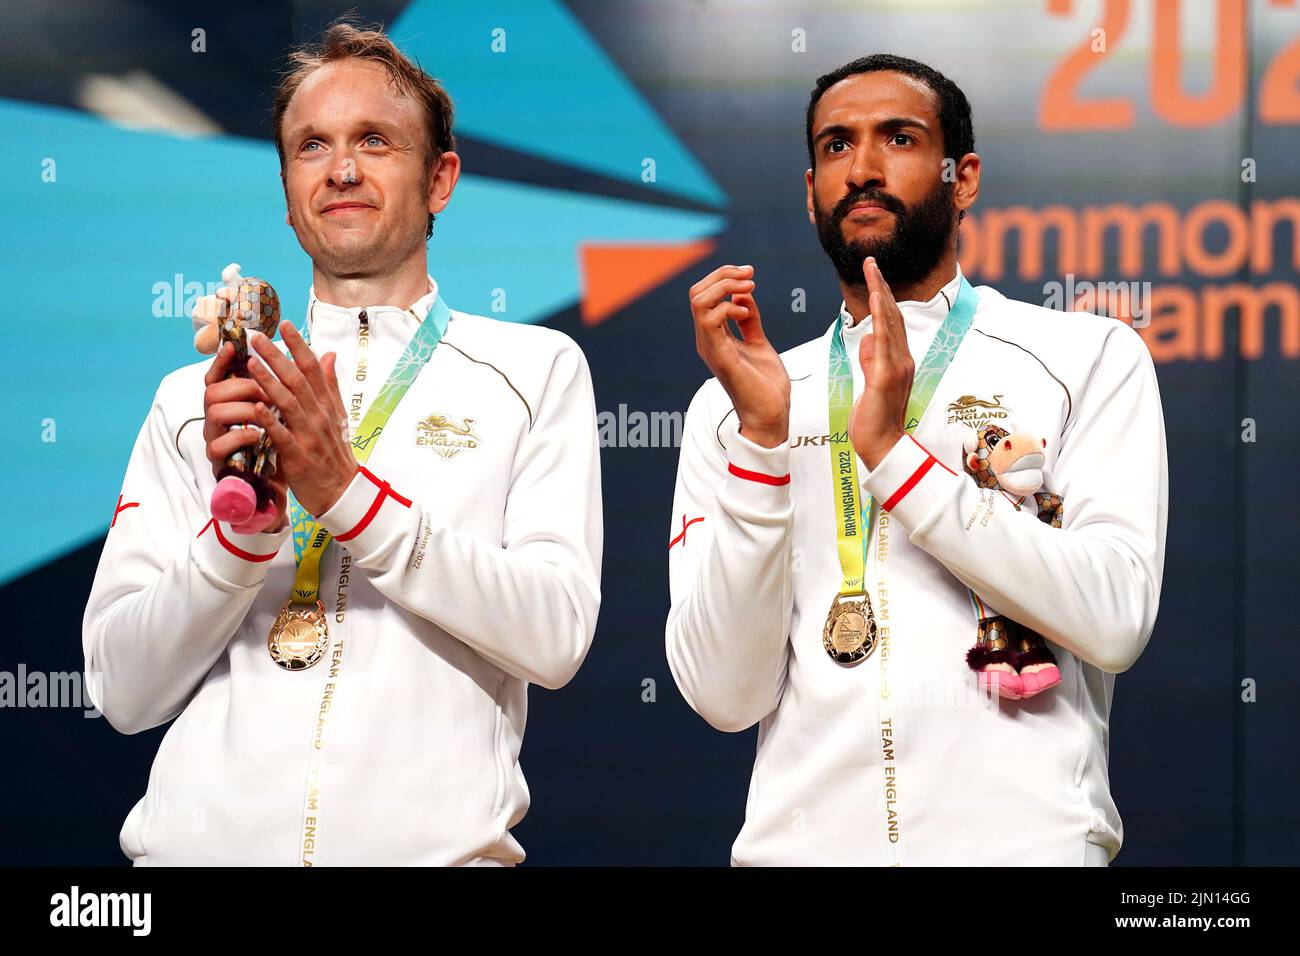 England's James Willstrop (left) and Declan James with the gold medal after the Men's Squash Doubles Medal match at the University of Birmingham Hockey and Squash Centre on day eleven of the 2022 Commonwealth Games in Birmingham. Picture date: Monday August 8, 2022. Stock Photo